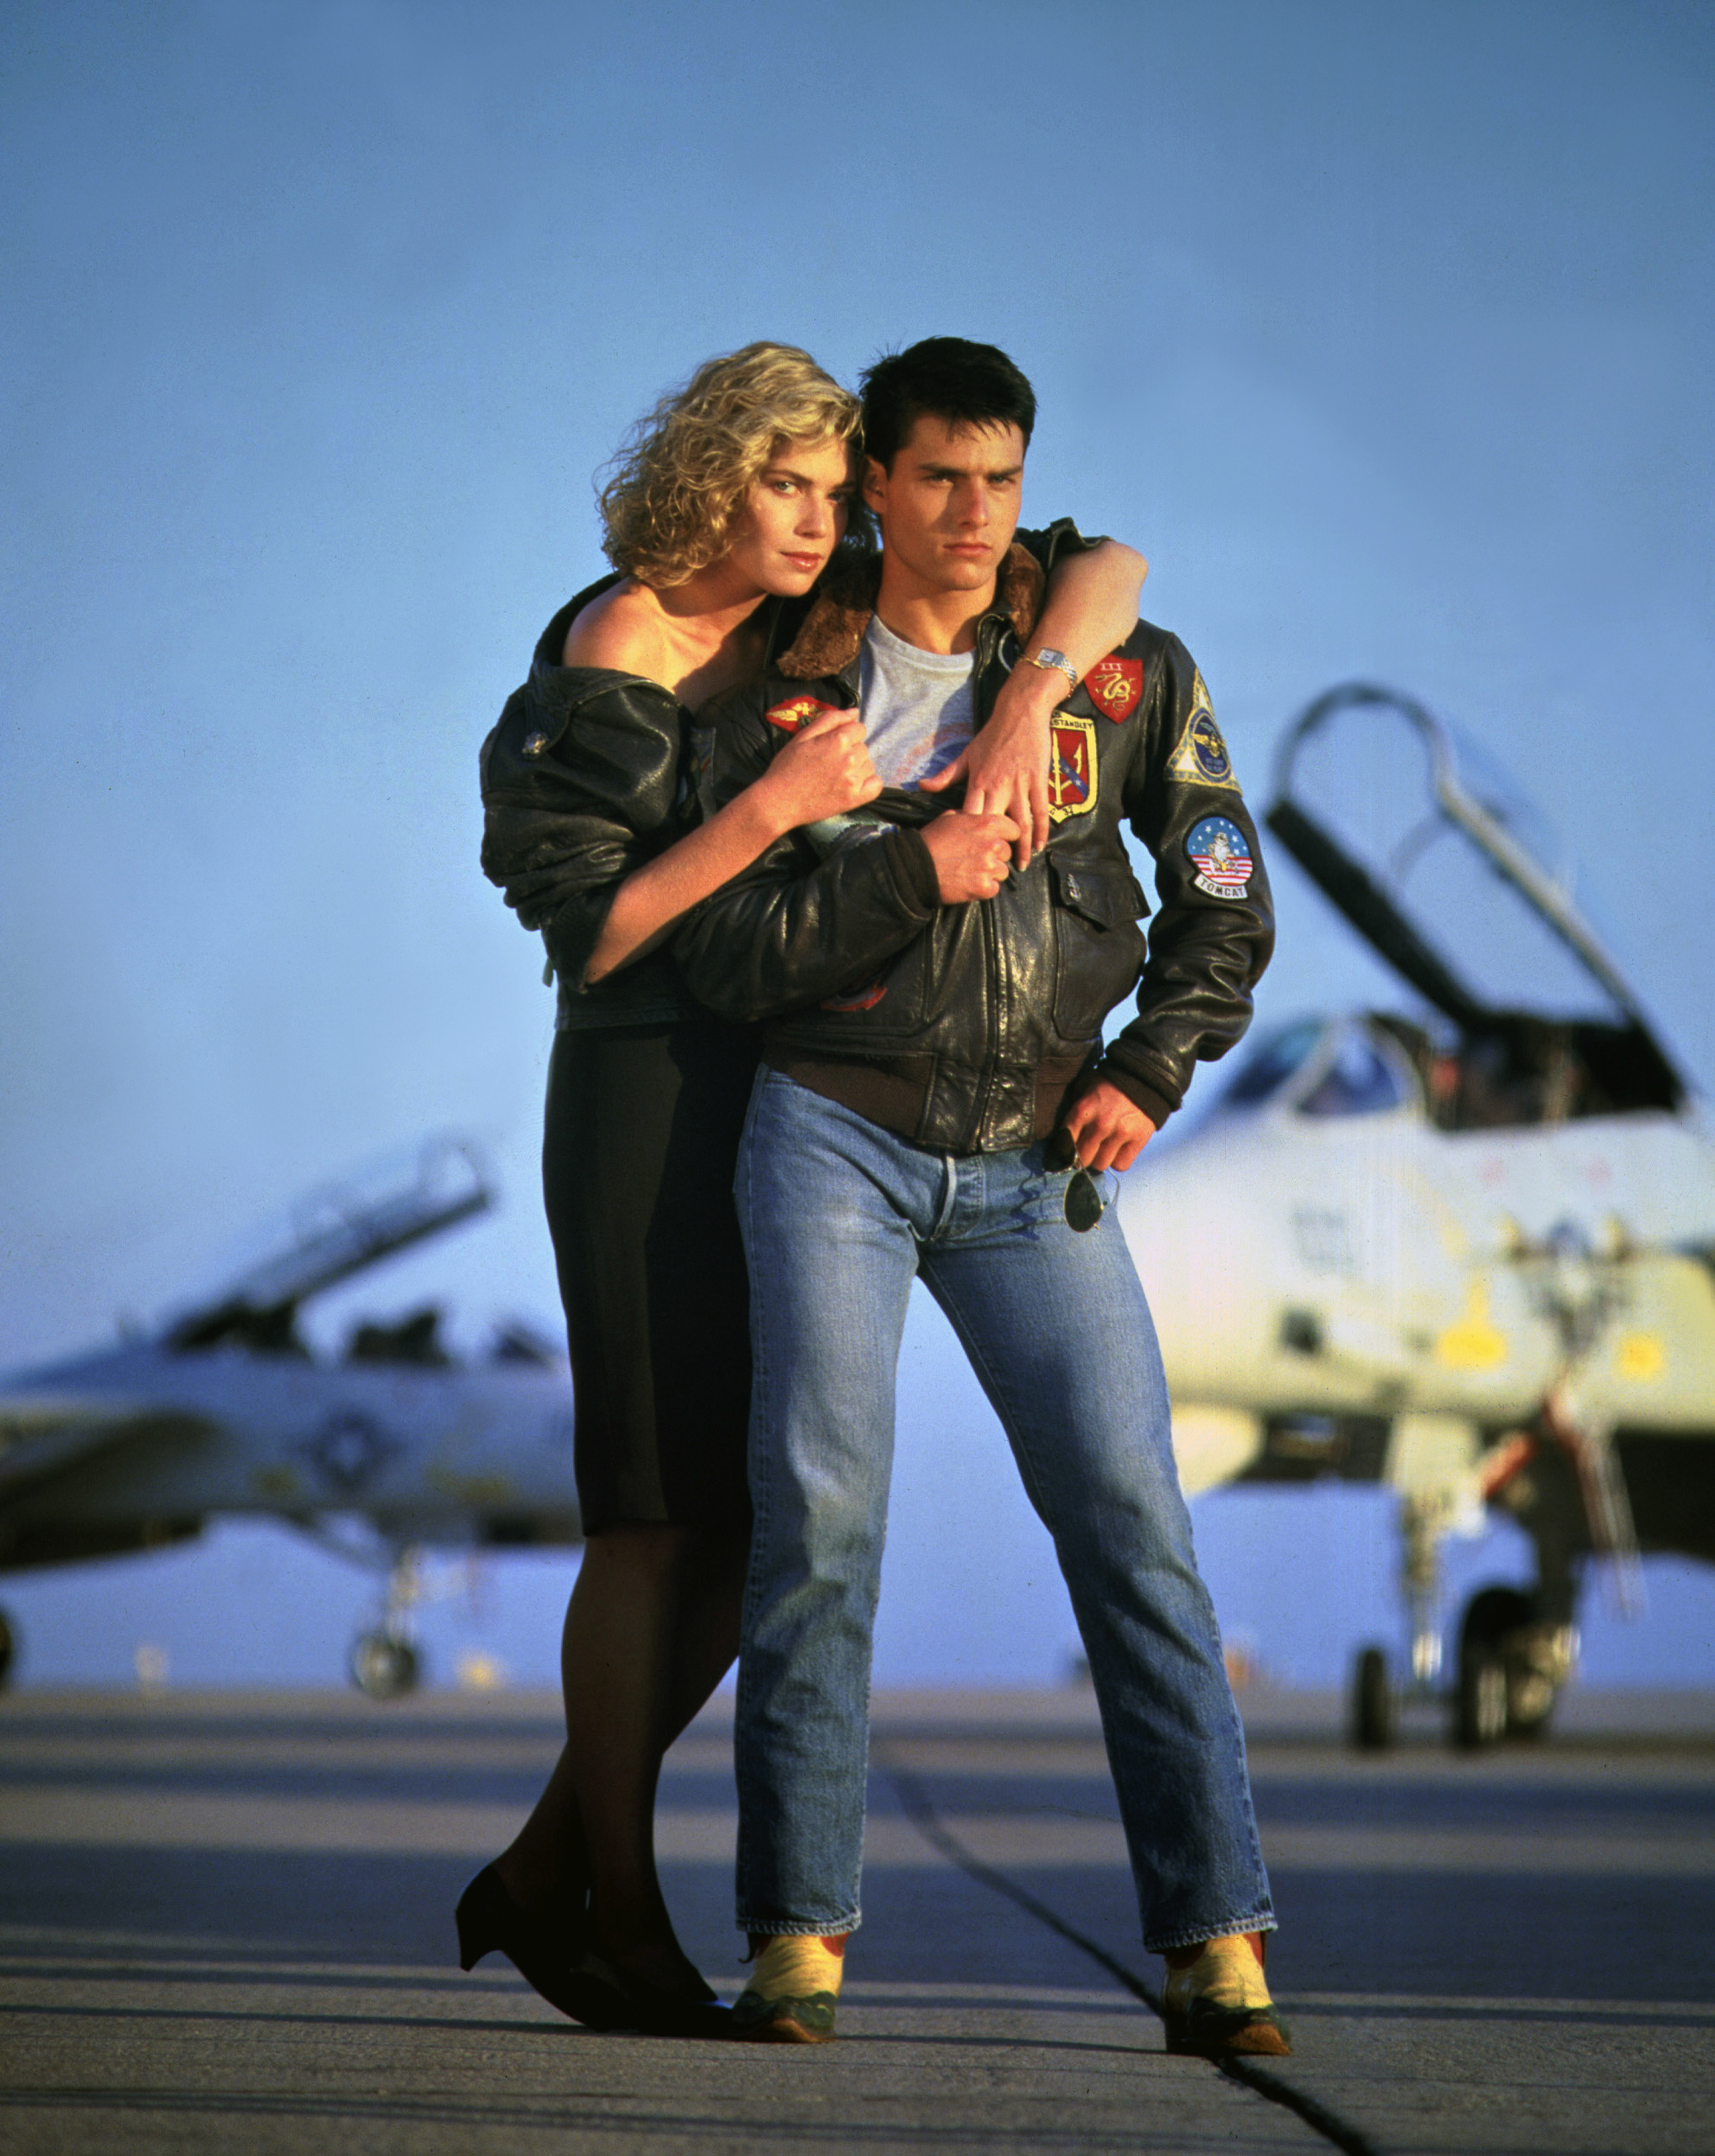 Kelly McGillis and Tom Cruise on the set of "Top Gun" in 1986 | Source: Getty Images